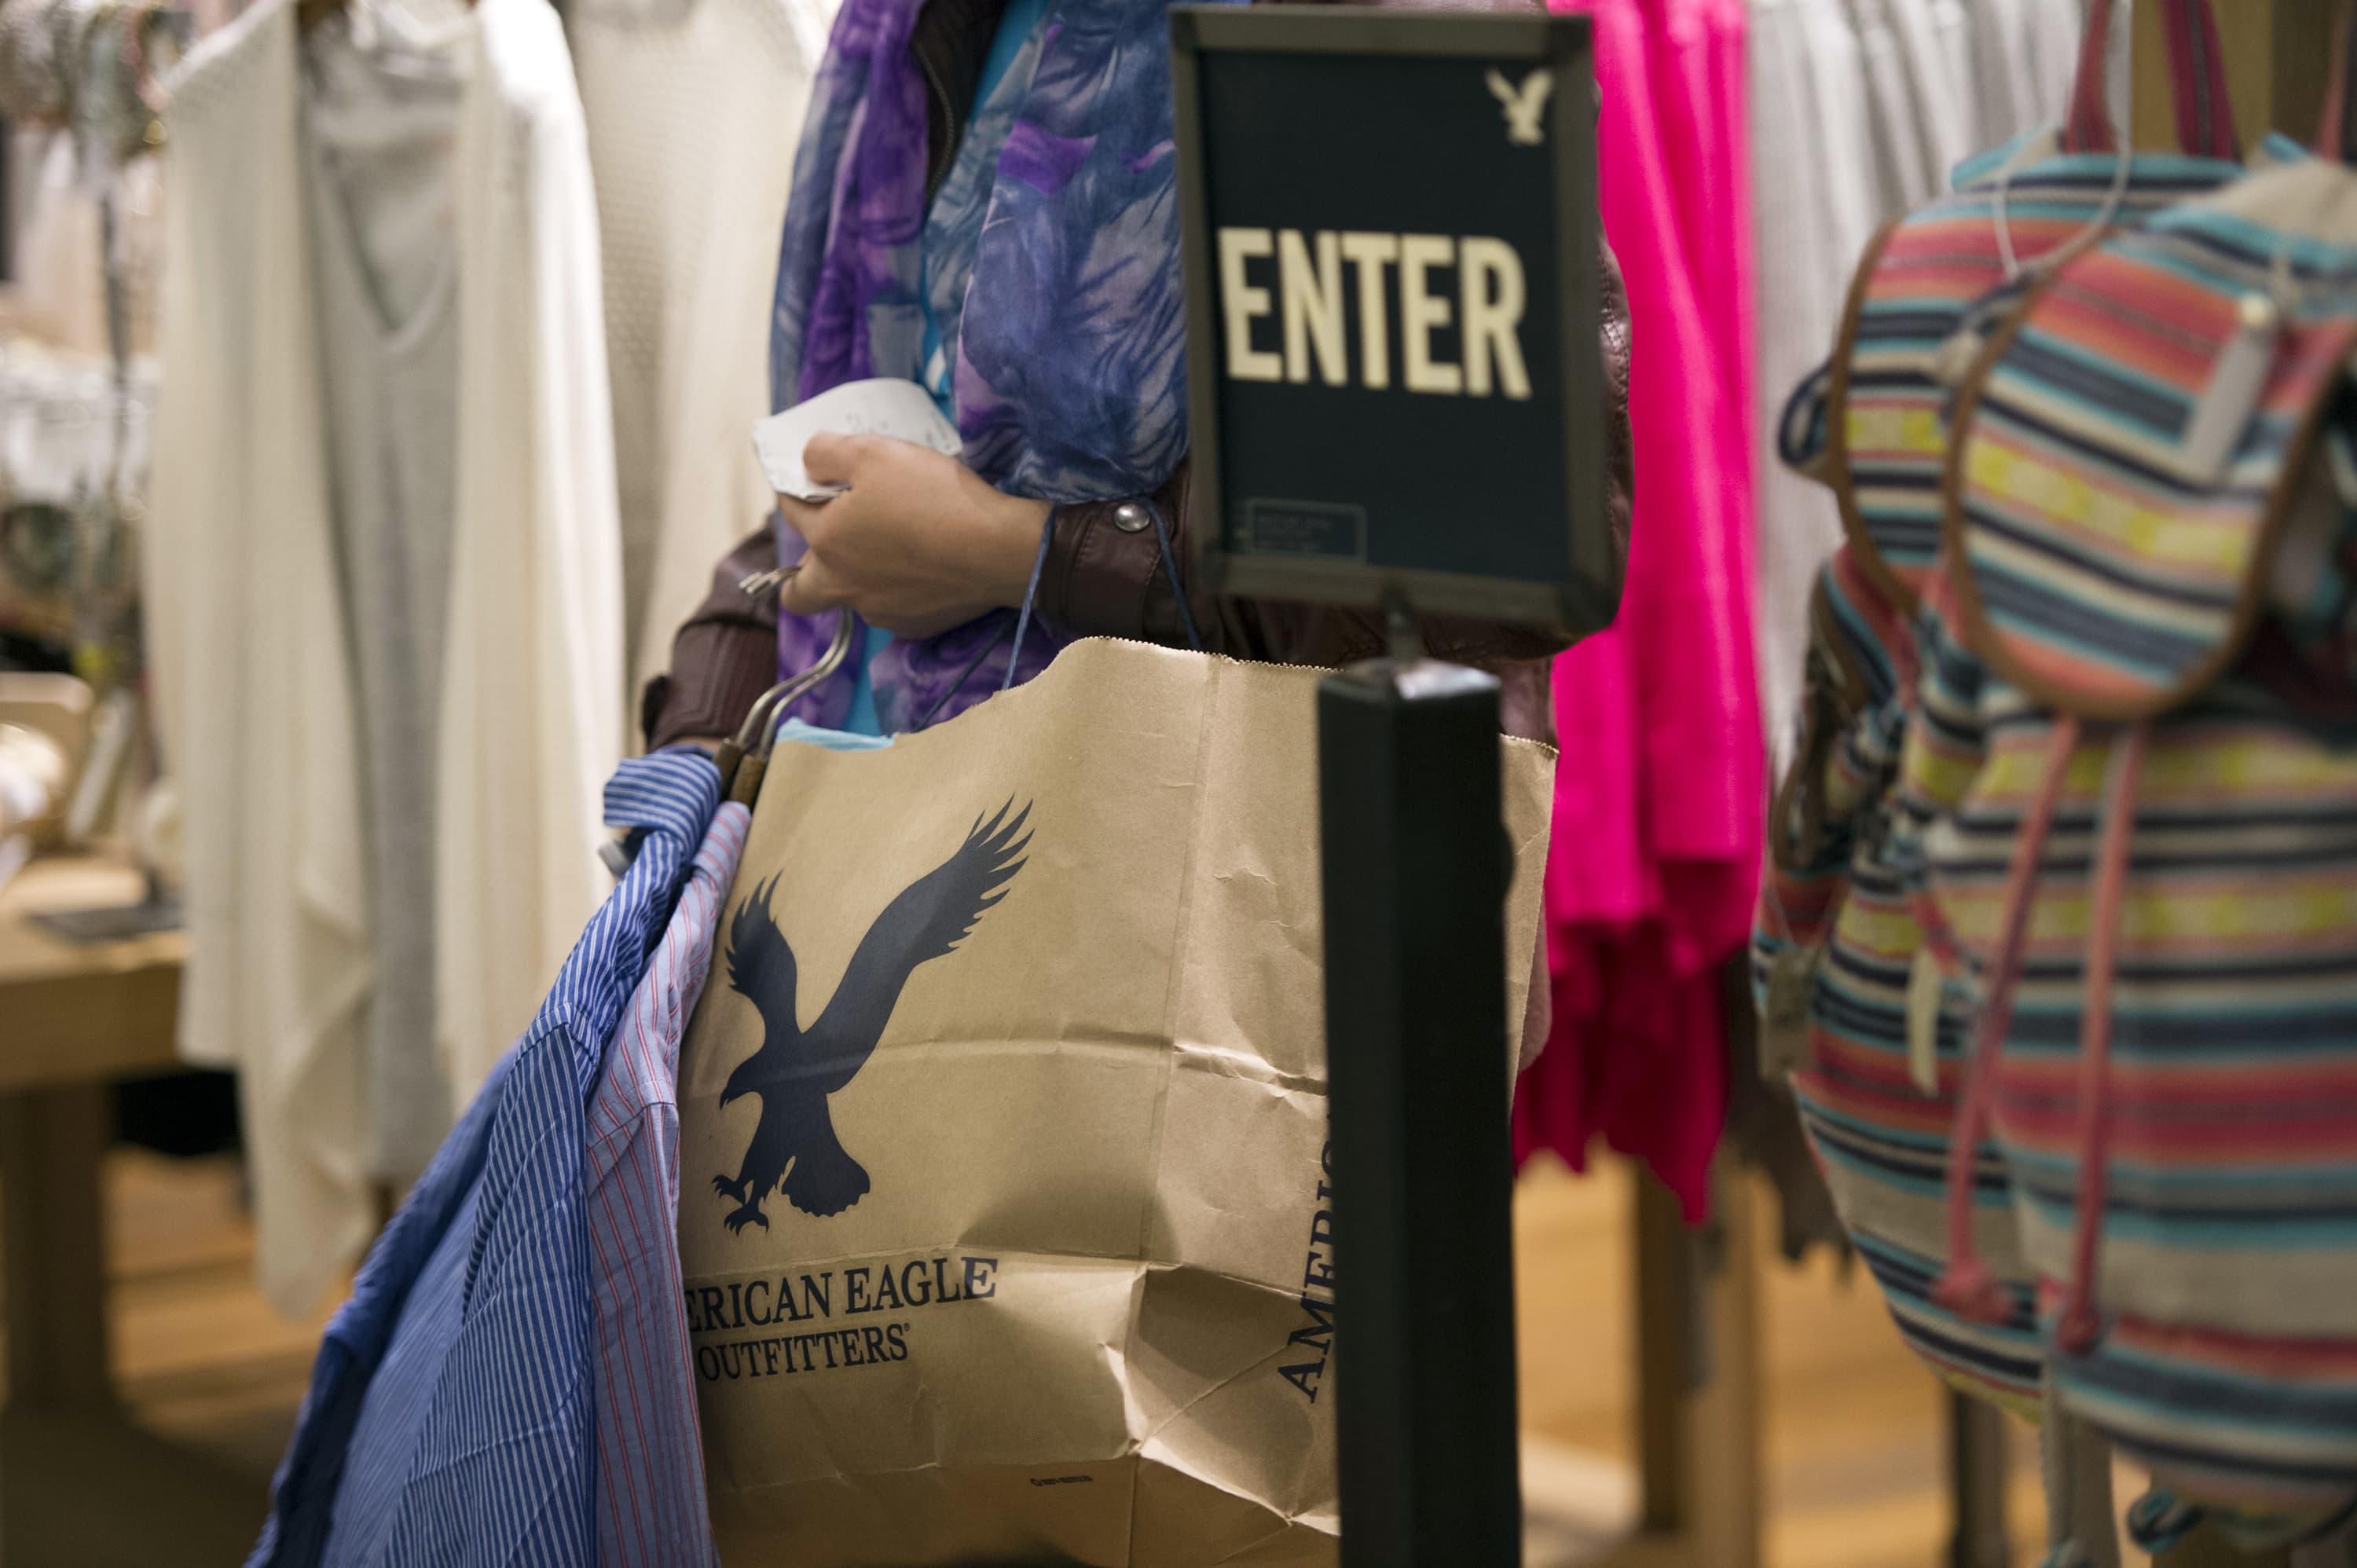 American Eagle Outfitters Expands Into Europe - WSJ